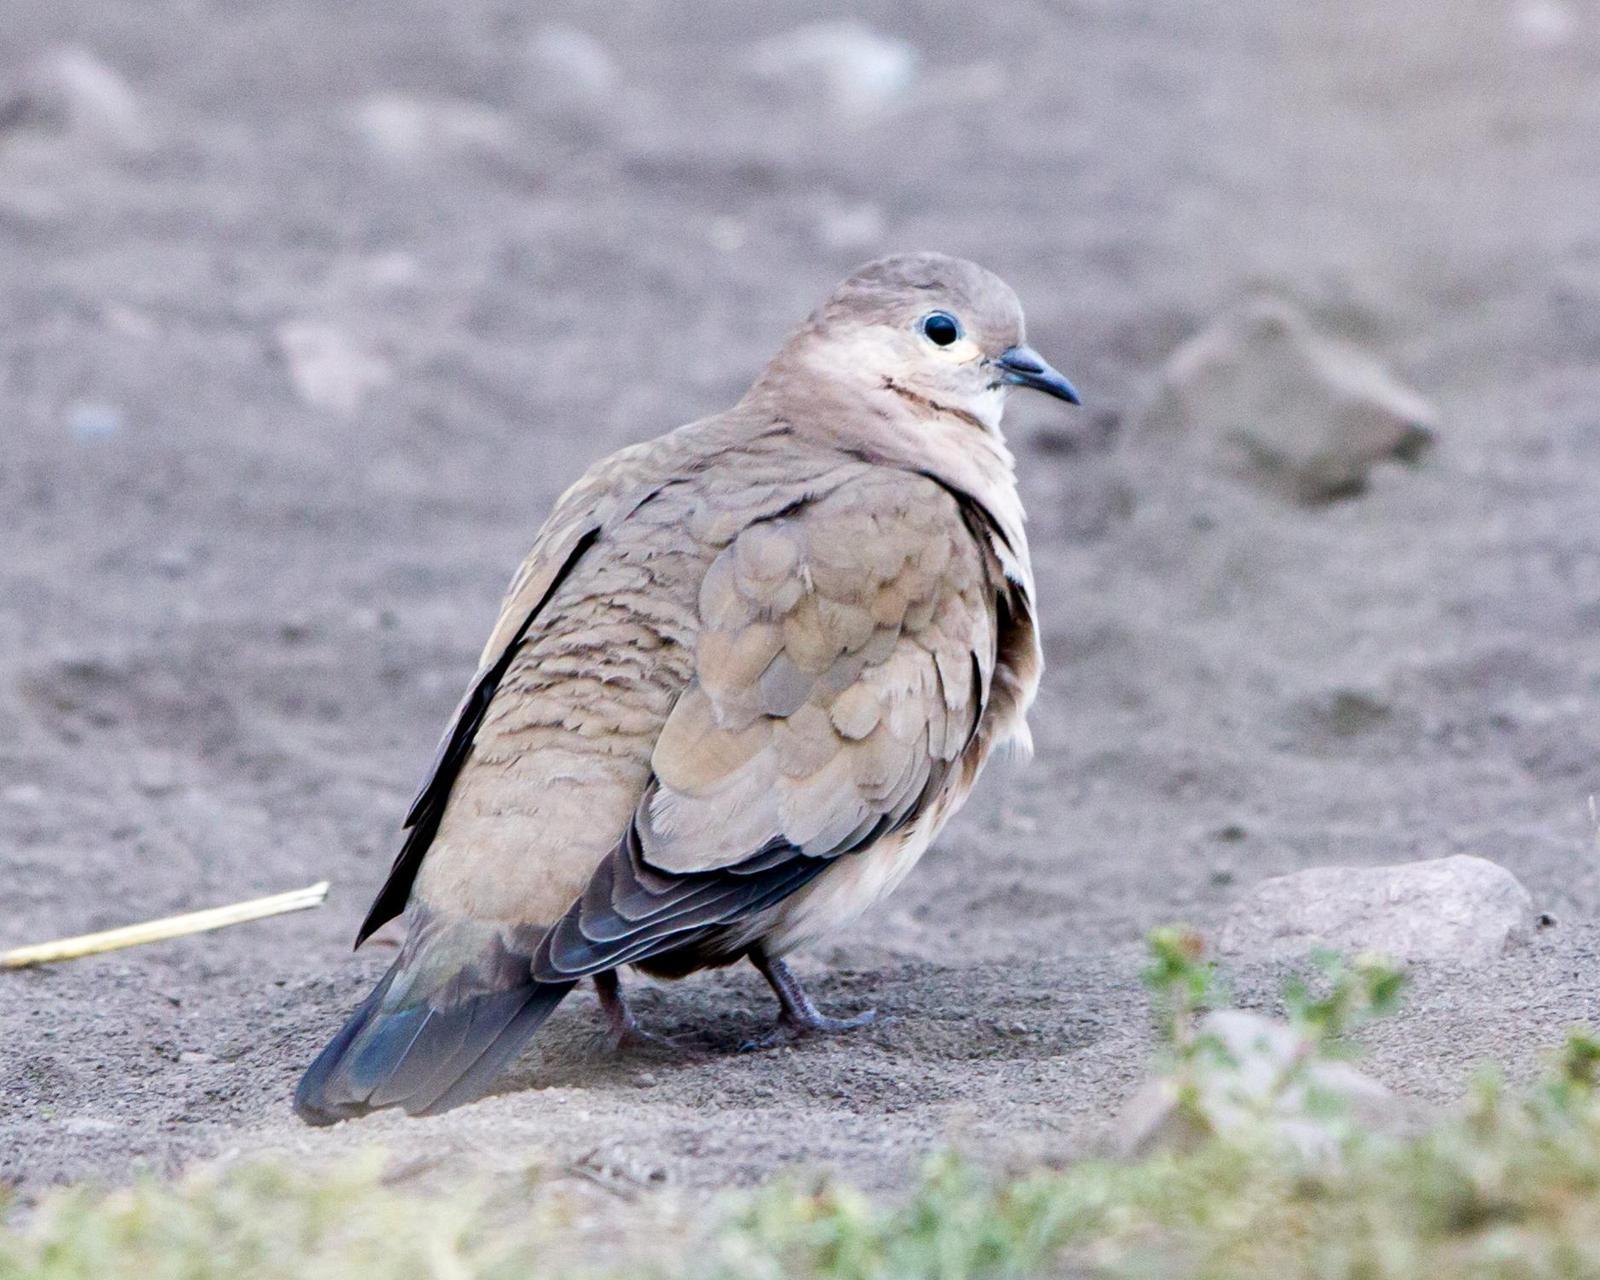 Black-winged Ground Dove Photo by Kevin Berkoff